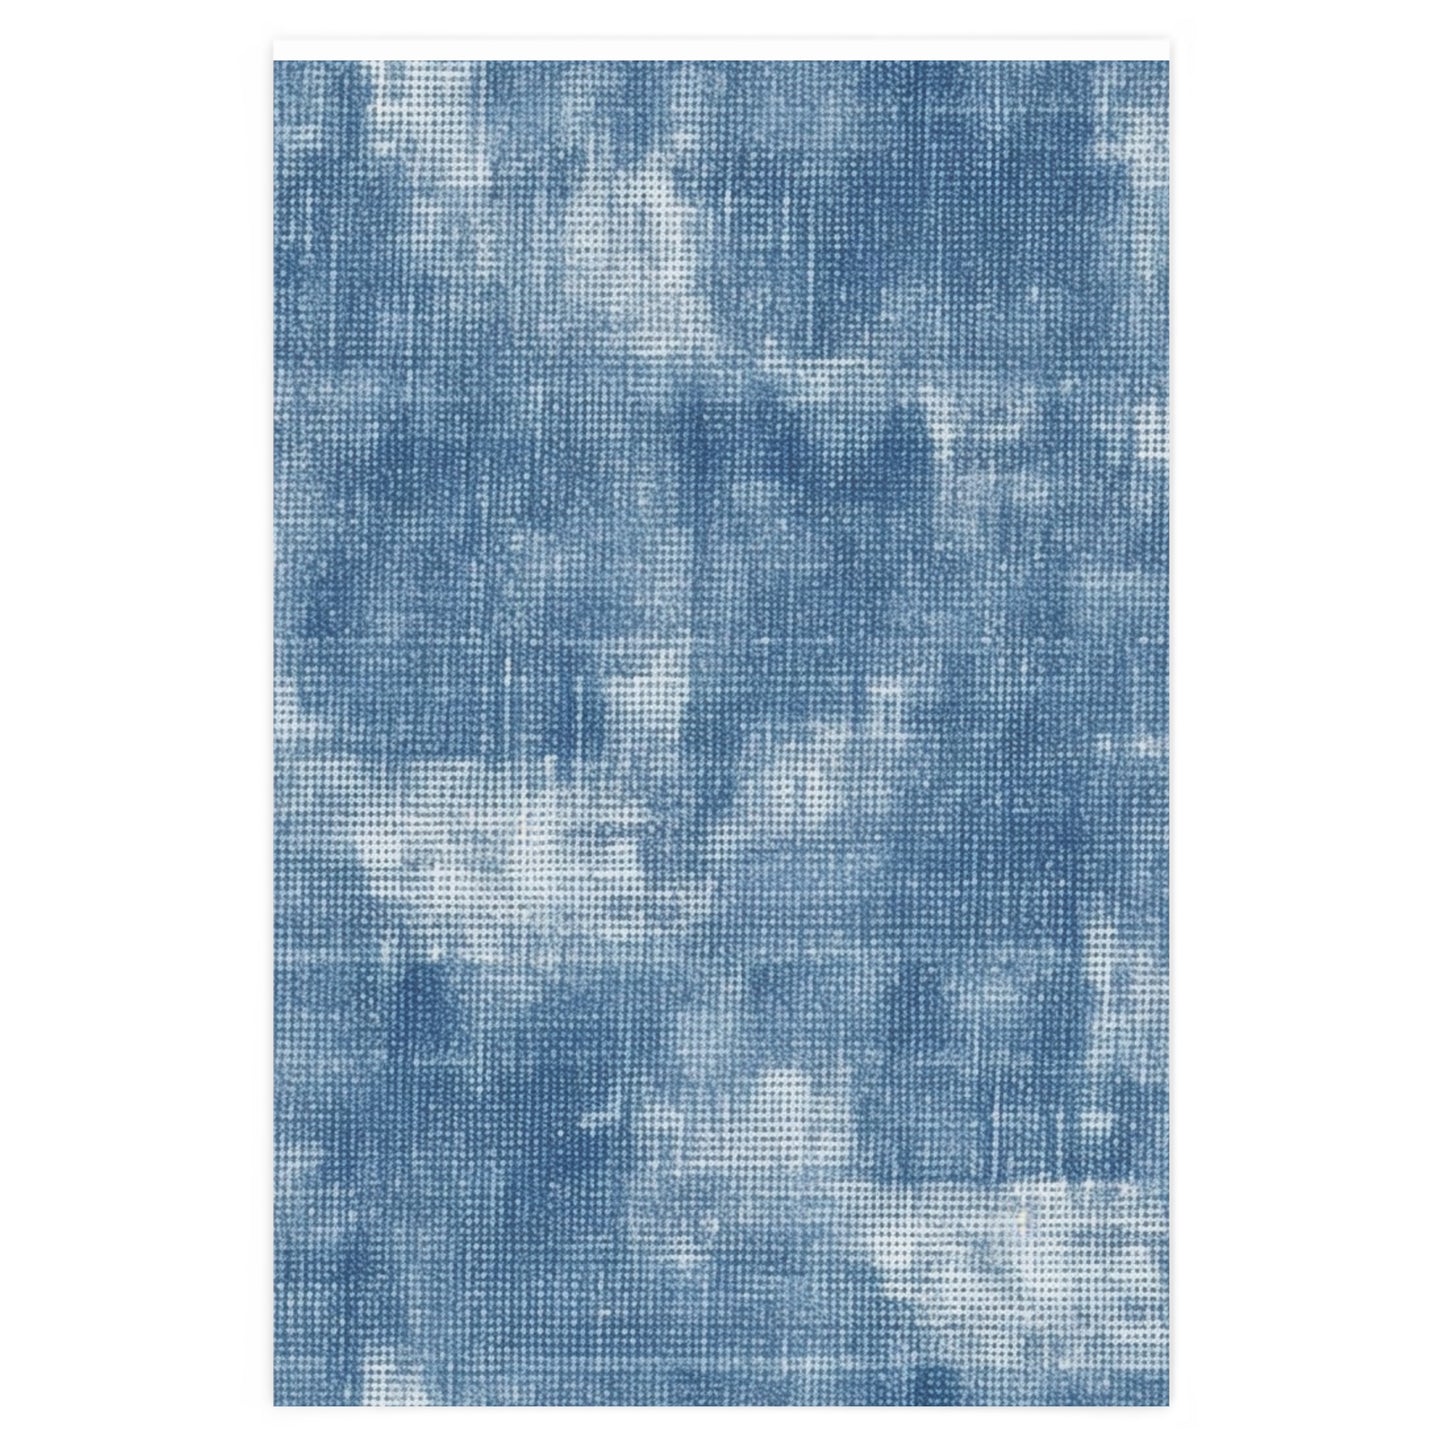 Faded Blue Washed-Out: Denim-Inspired, Style Fabric - Wrapping Paper